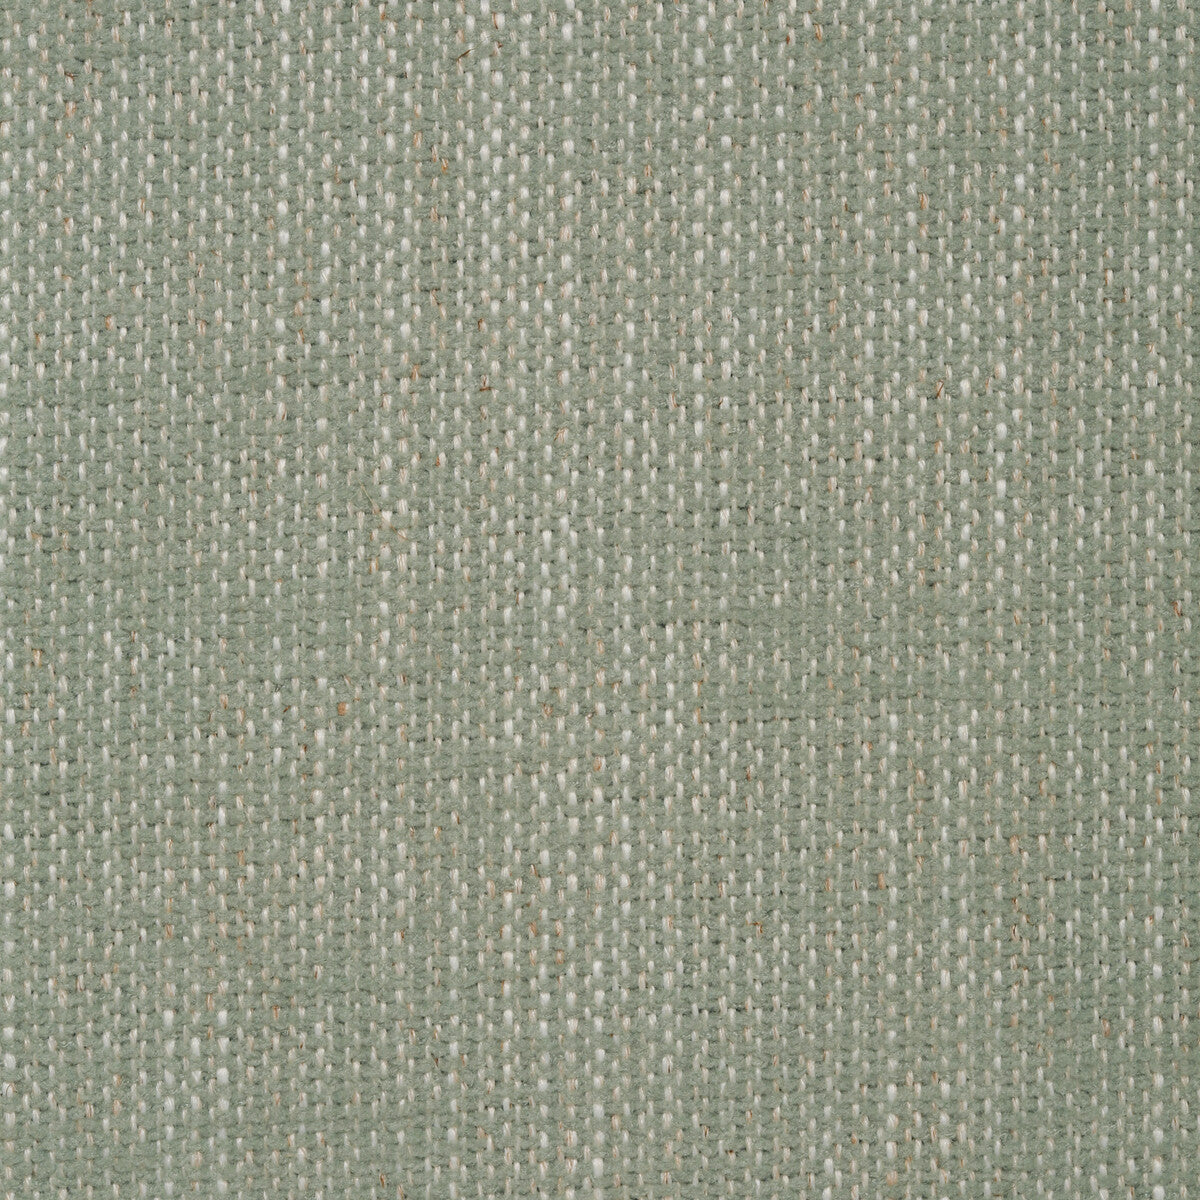 Kravet Contract fabric in 35112-13 color - pattern 35112.13.0 - by Kravet Contract in the Crypton Incase collection